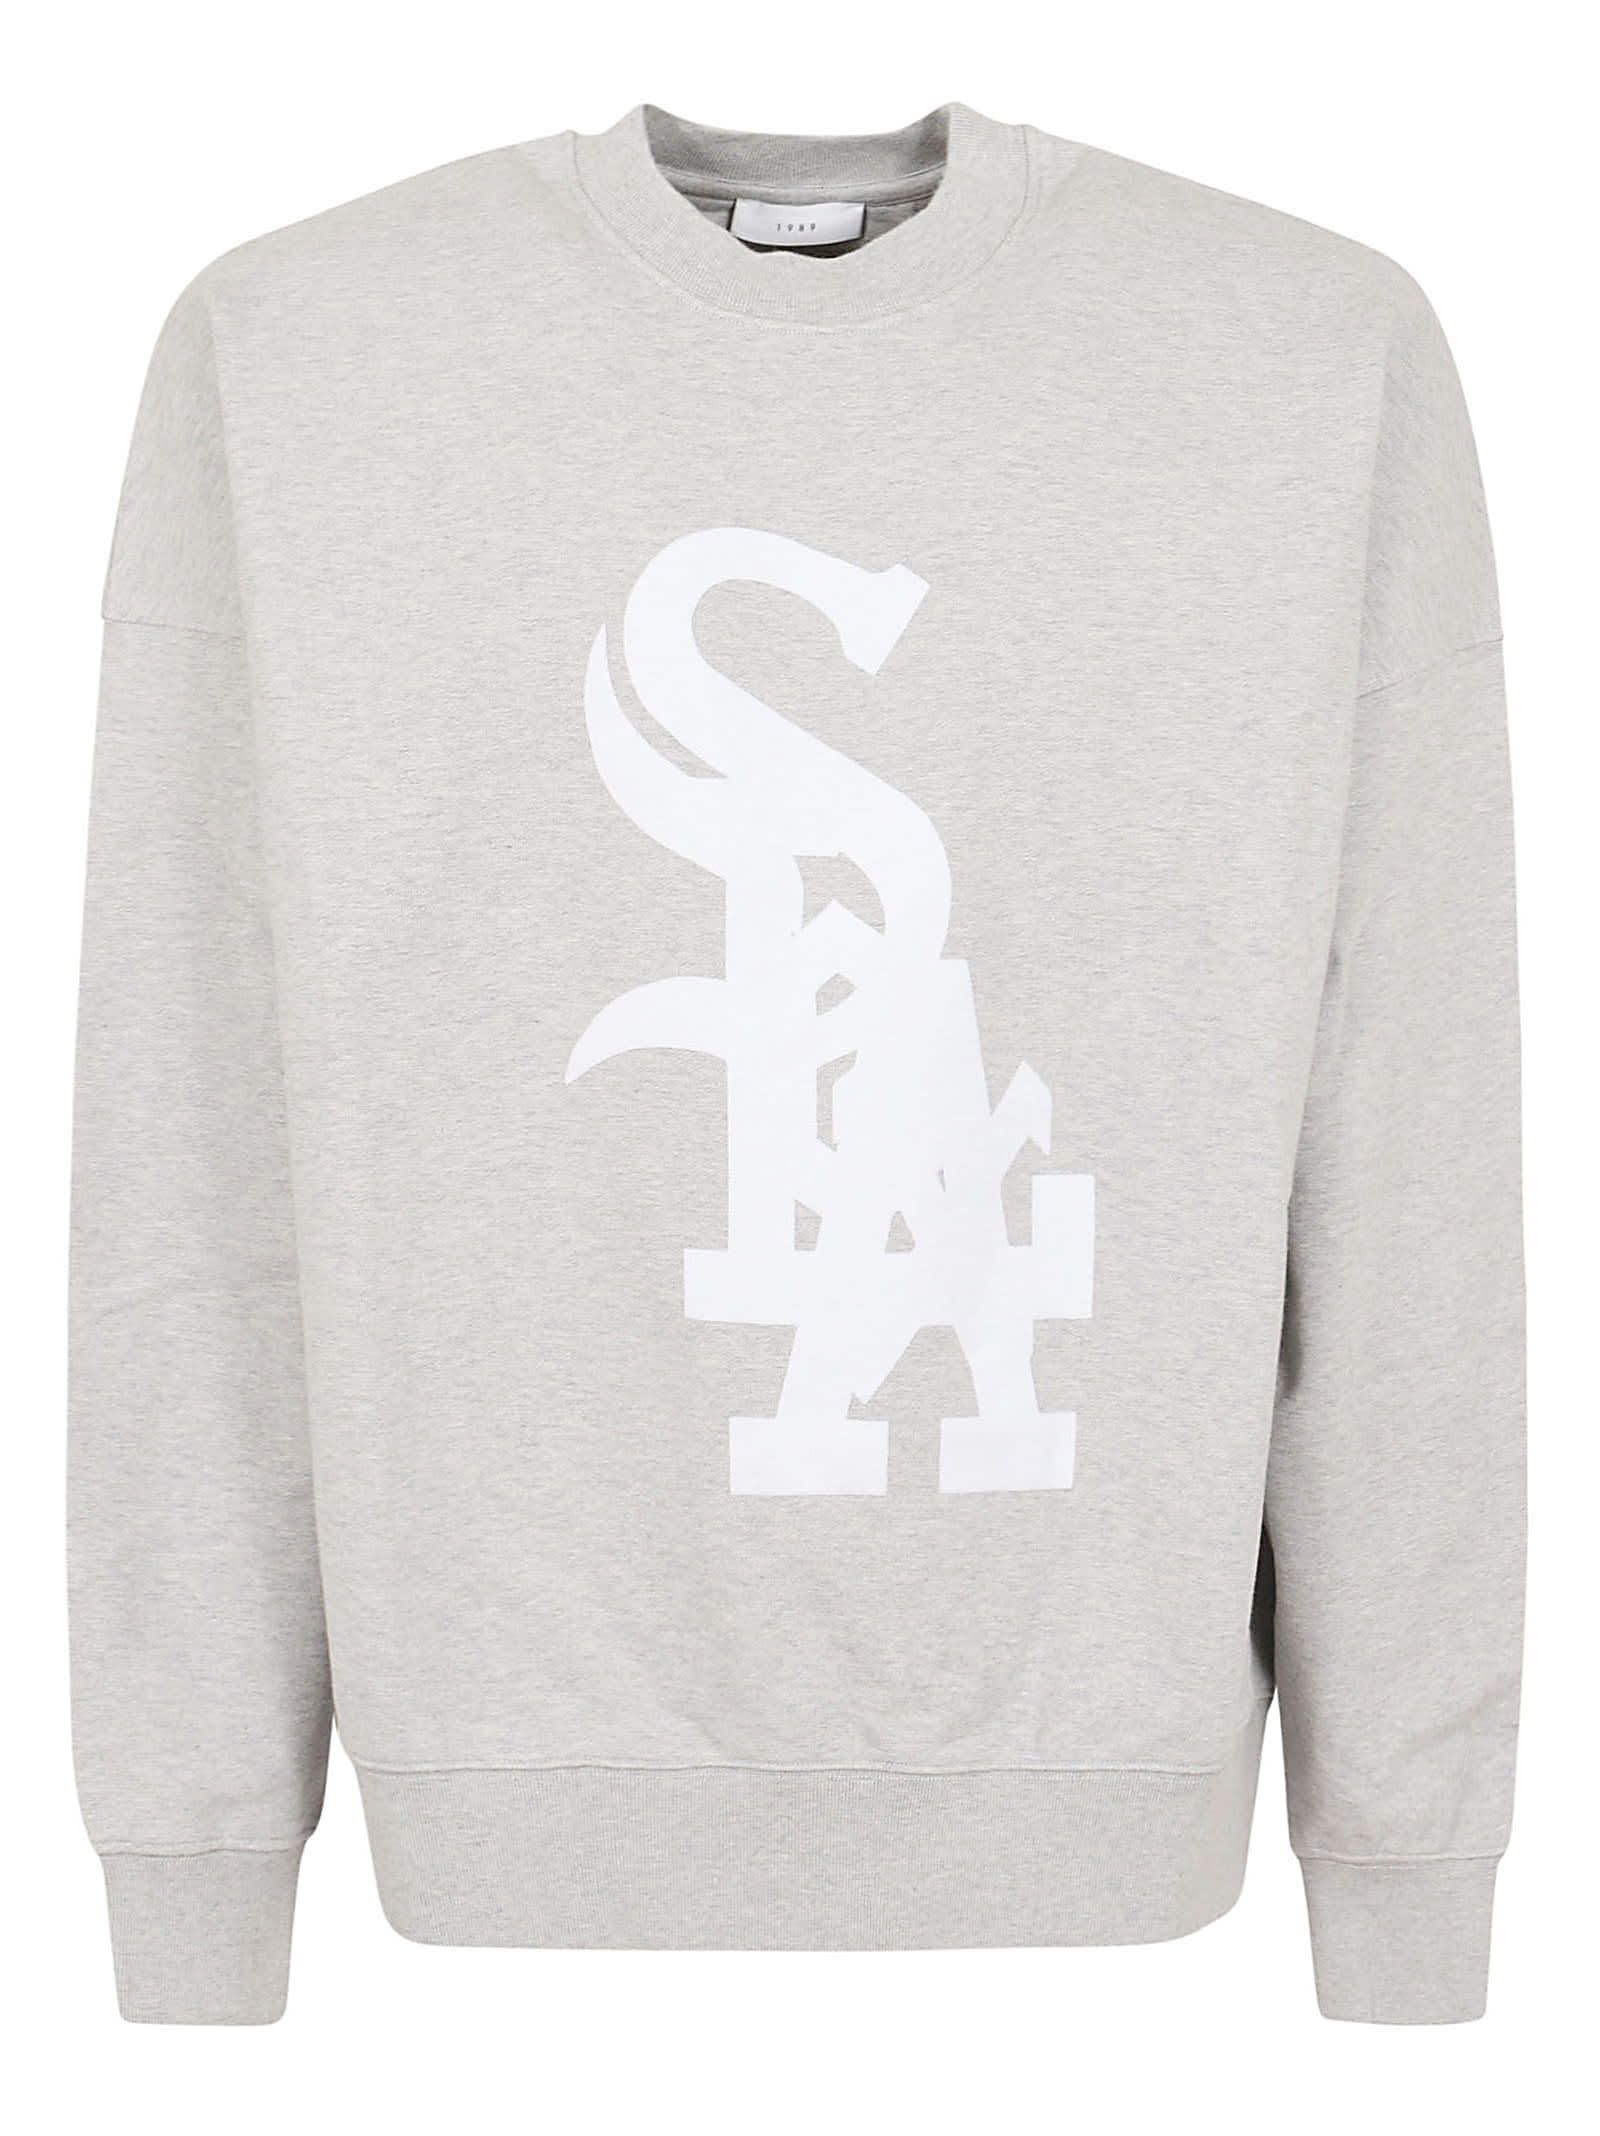 Midwest Relaxed Sweatshirt